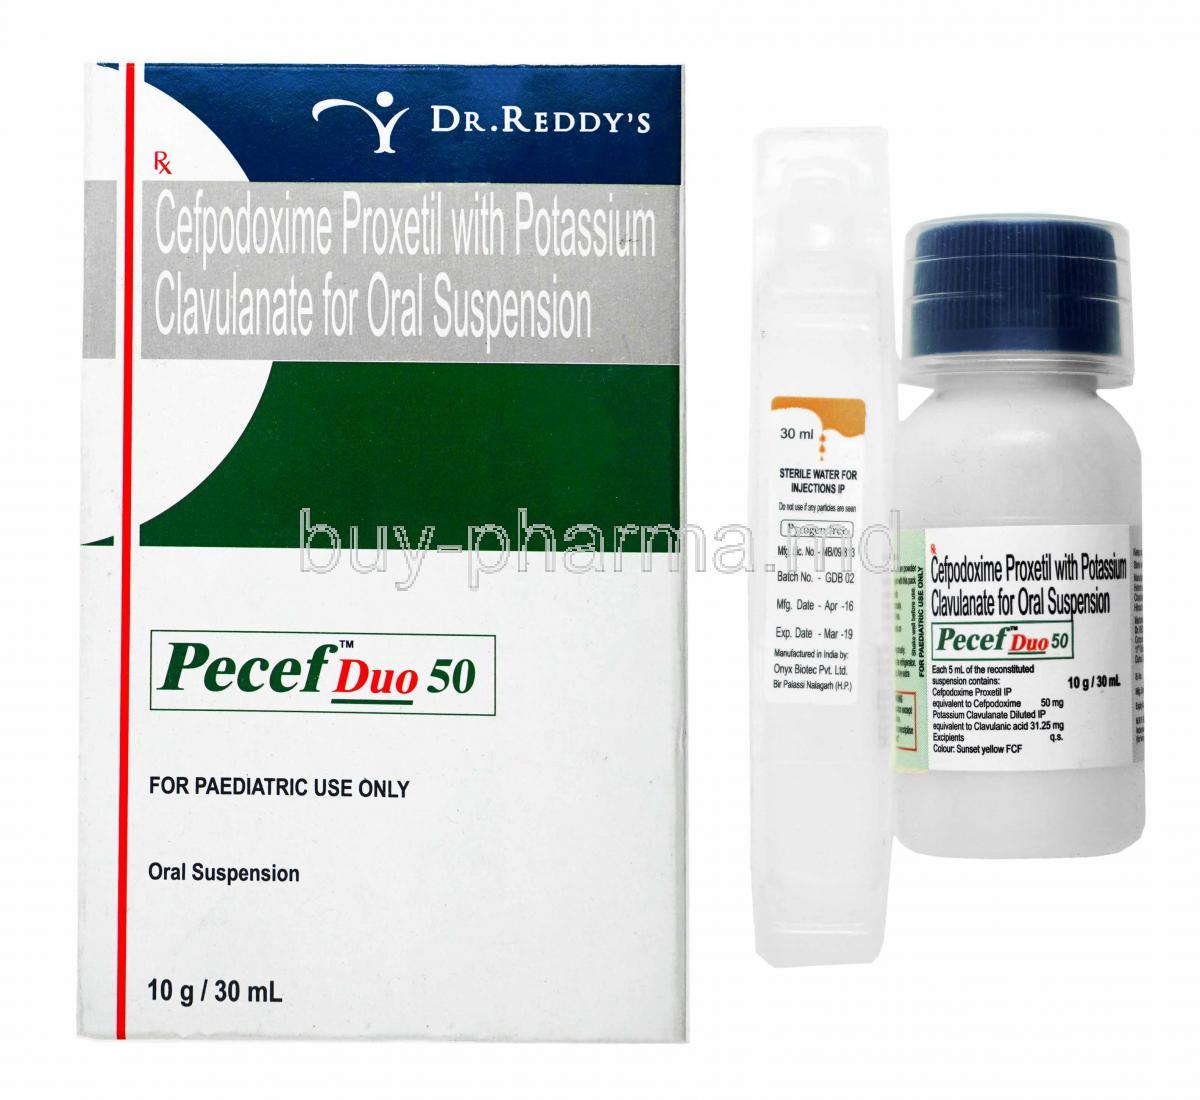 Pecef Duo Oral Suspension, Cefpodoxime Proxetil and Clavulanic Acid box and bottle